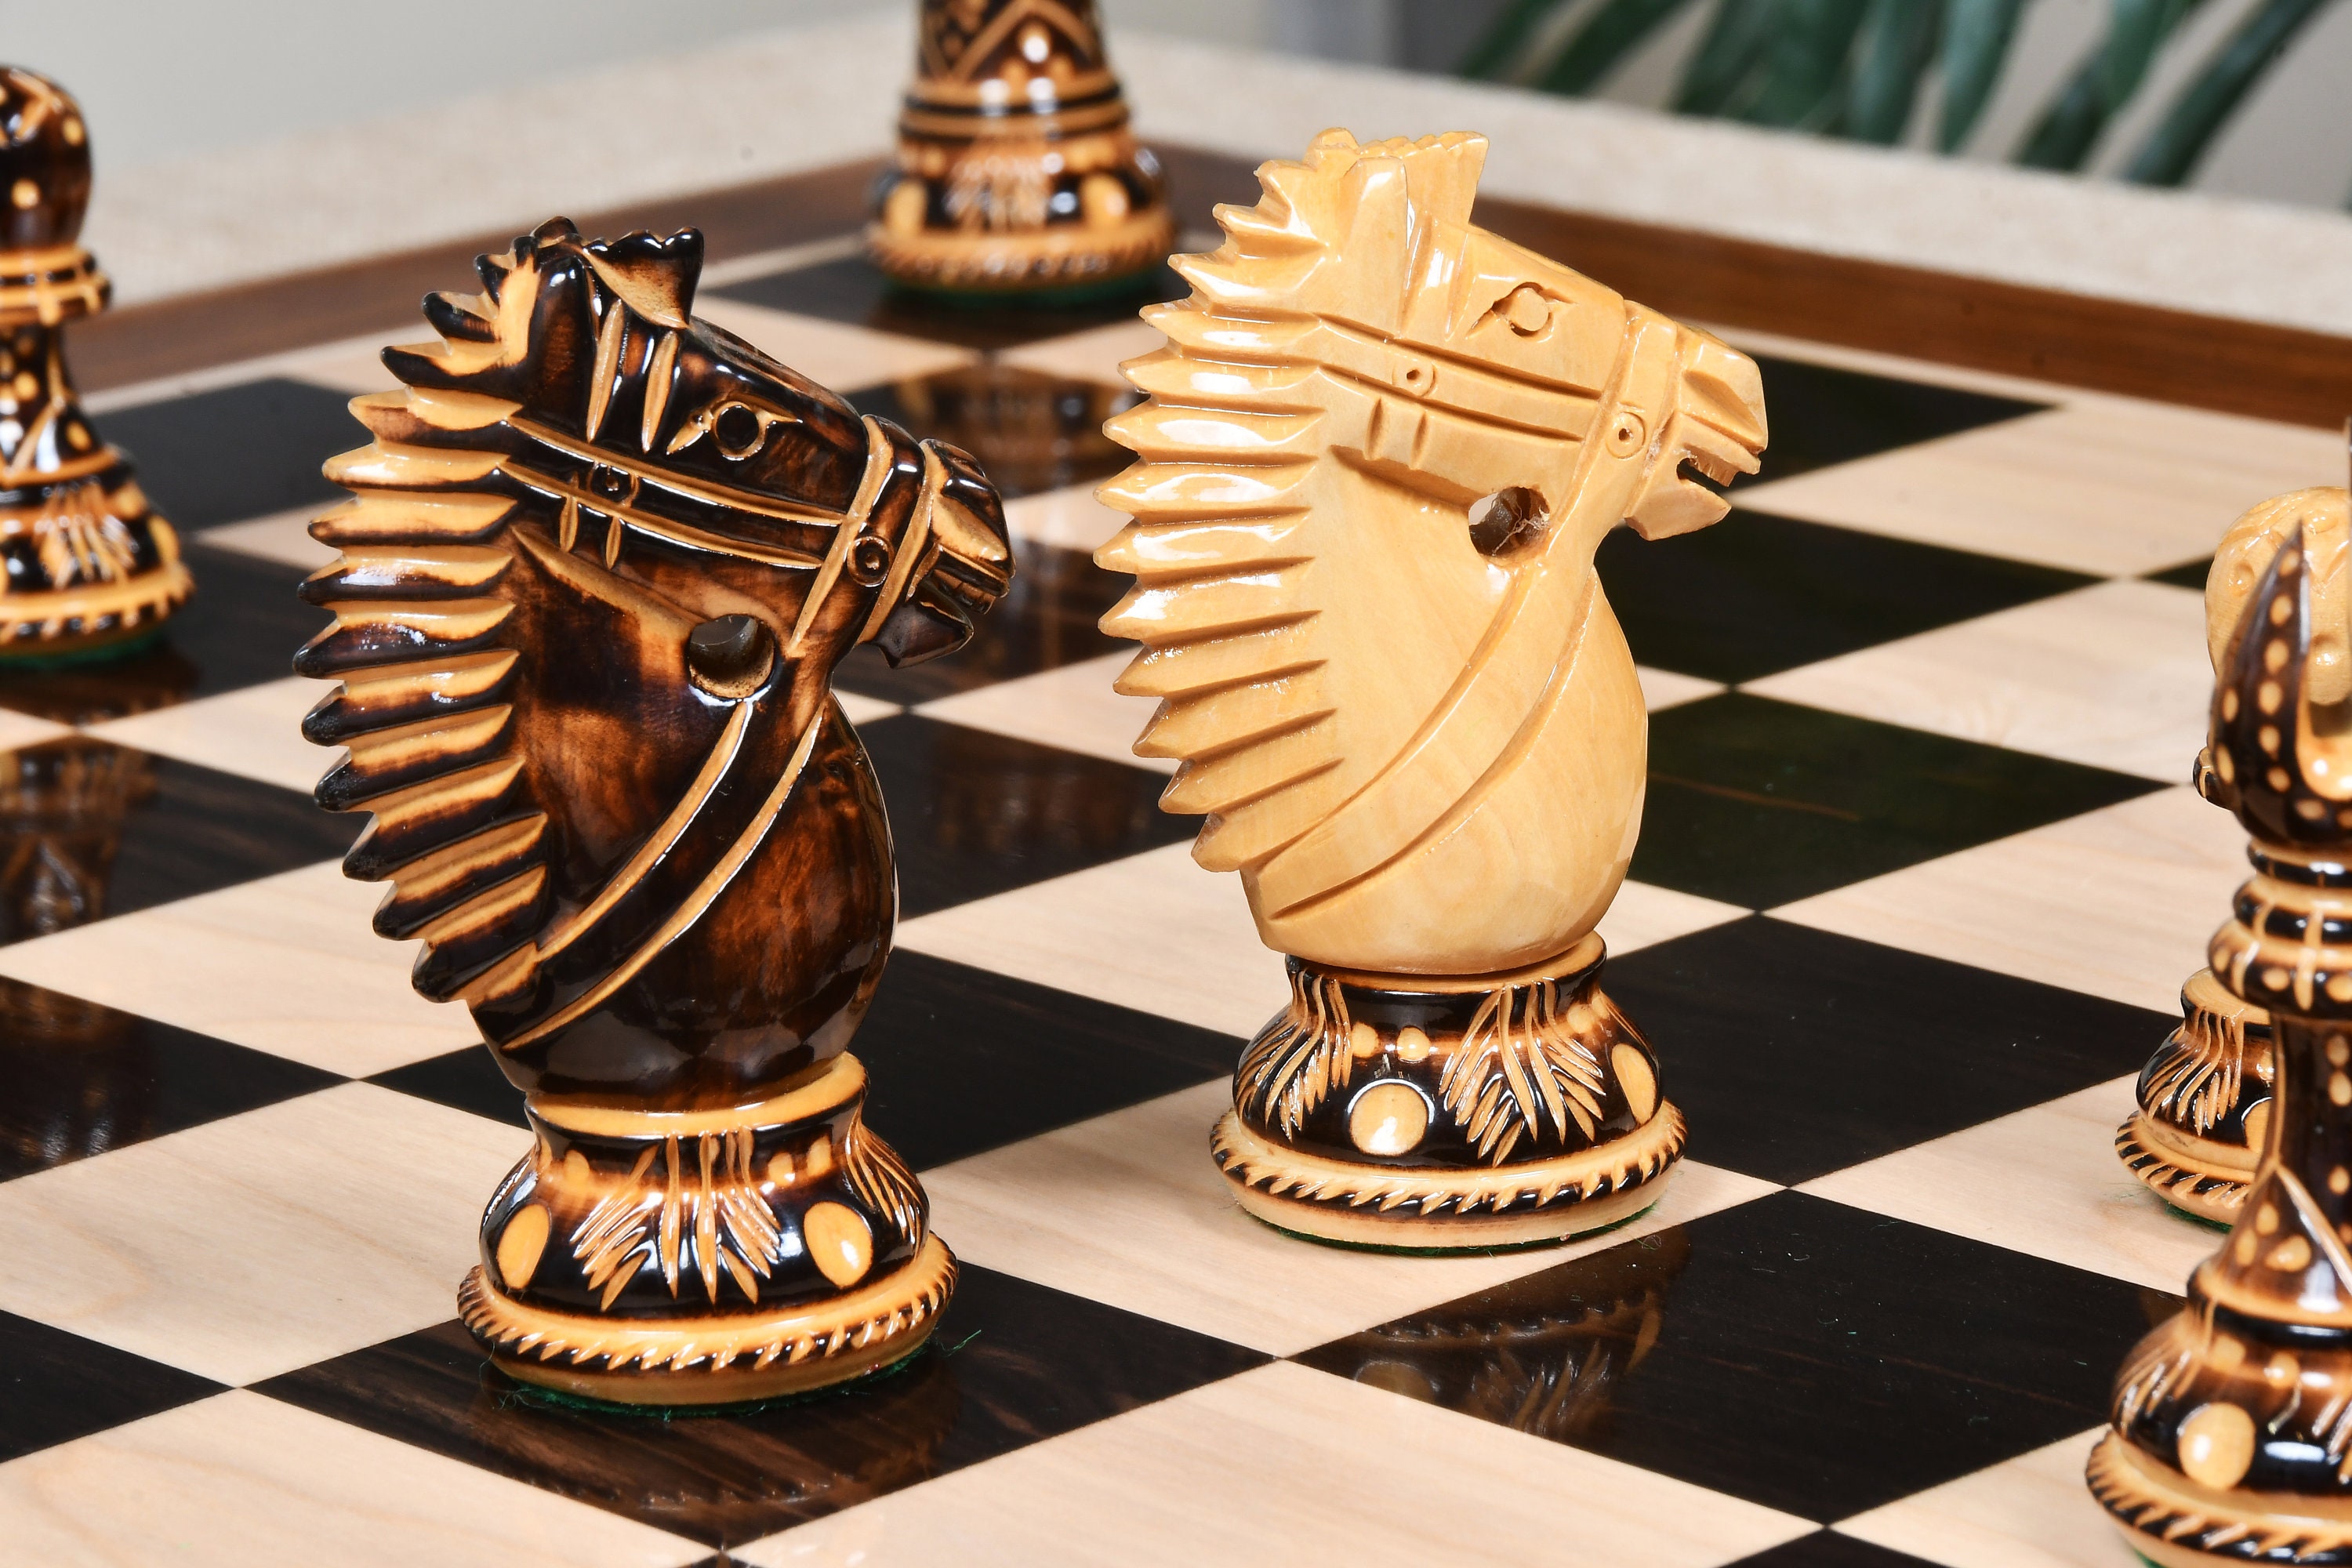 The Bridle Study Analysis Chess Pieces in Ebonized and Boxwood -   Denmark